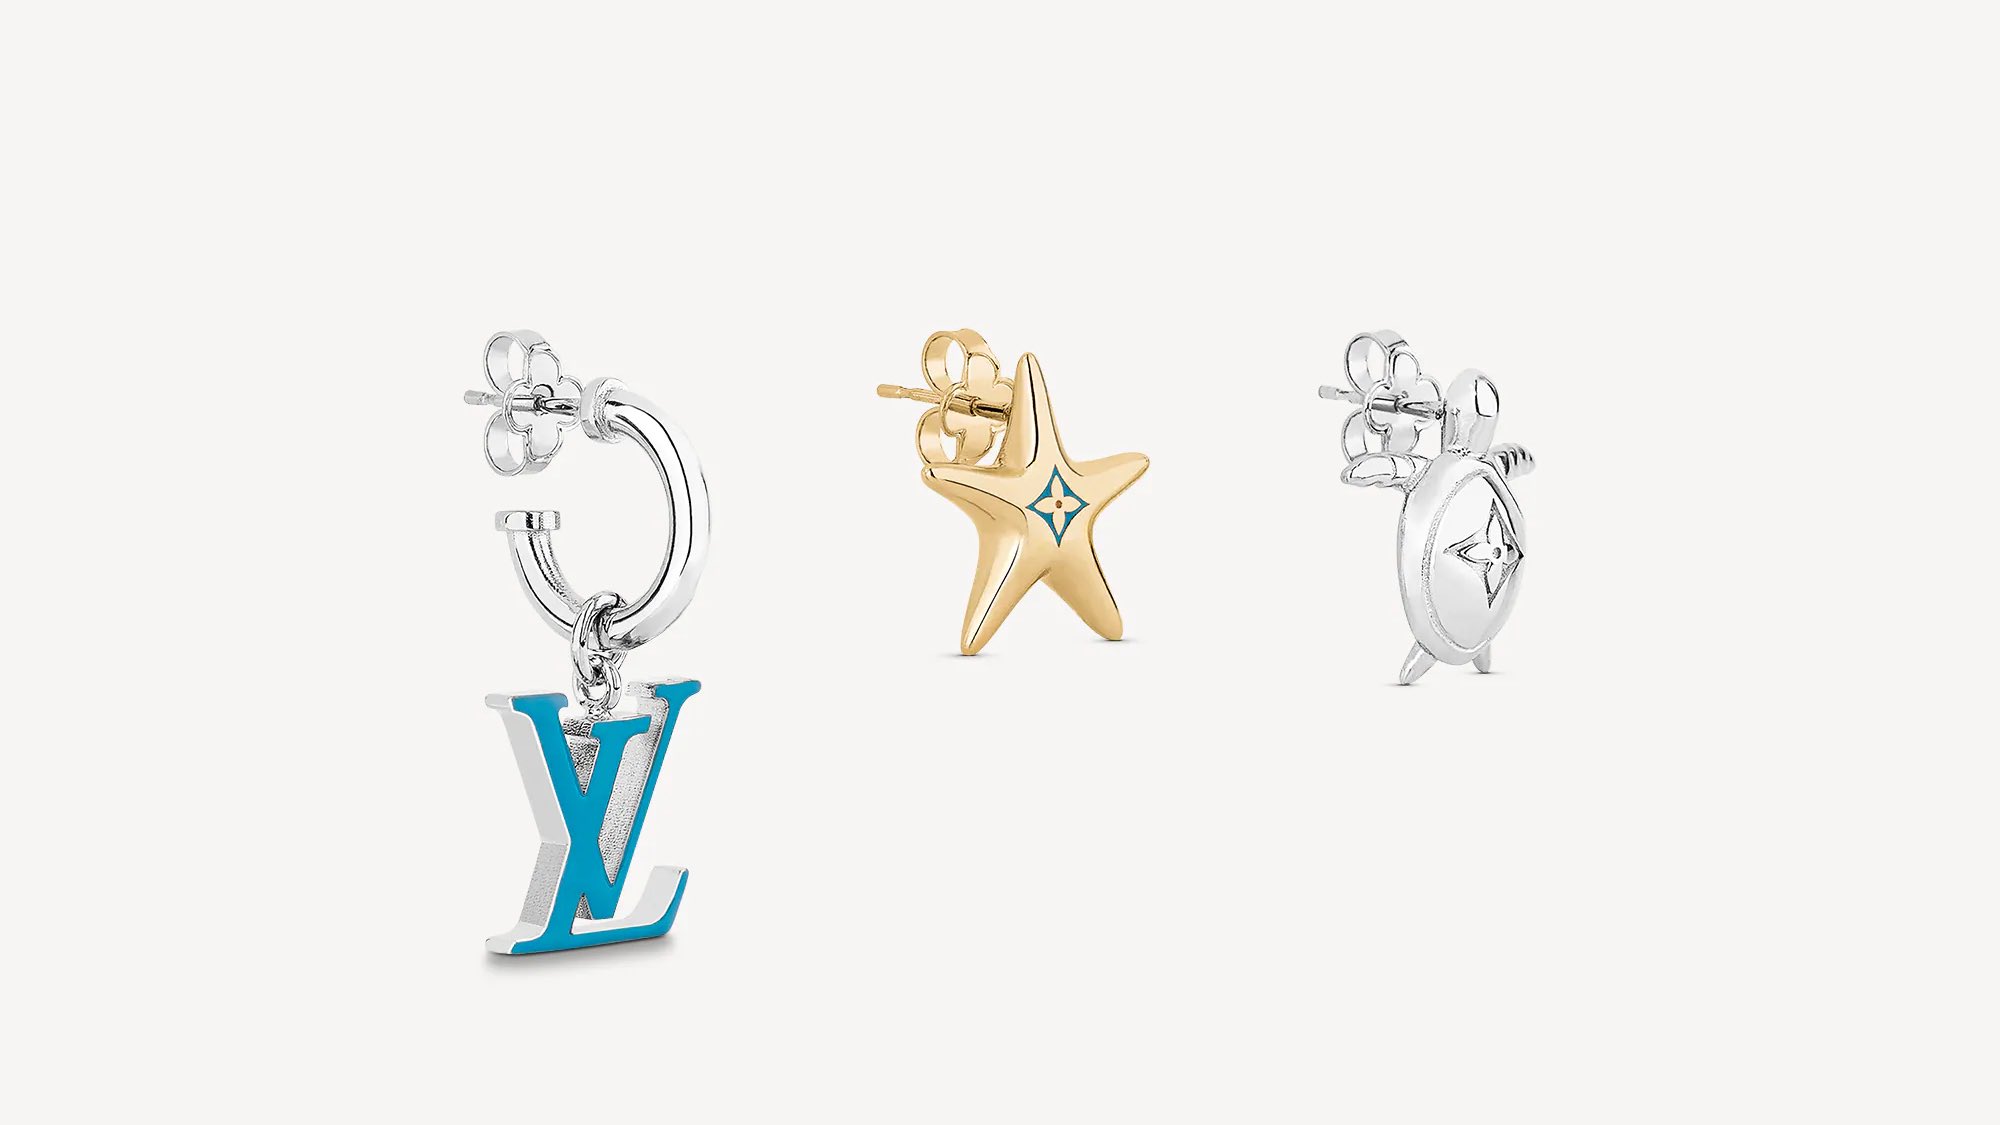 Bangtan Style⁷ (slow) on X: The LOUIS VUITTON LV Aquatics Earrings is a  3-piece set of different earrings for $520. He wears 2 LV monogram earrings.   / X